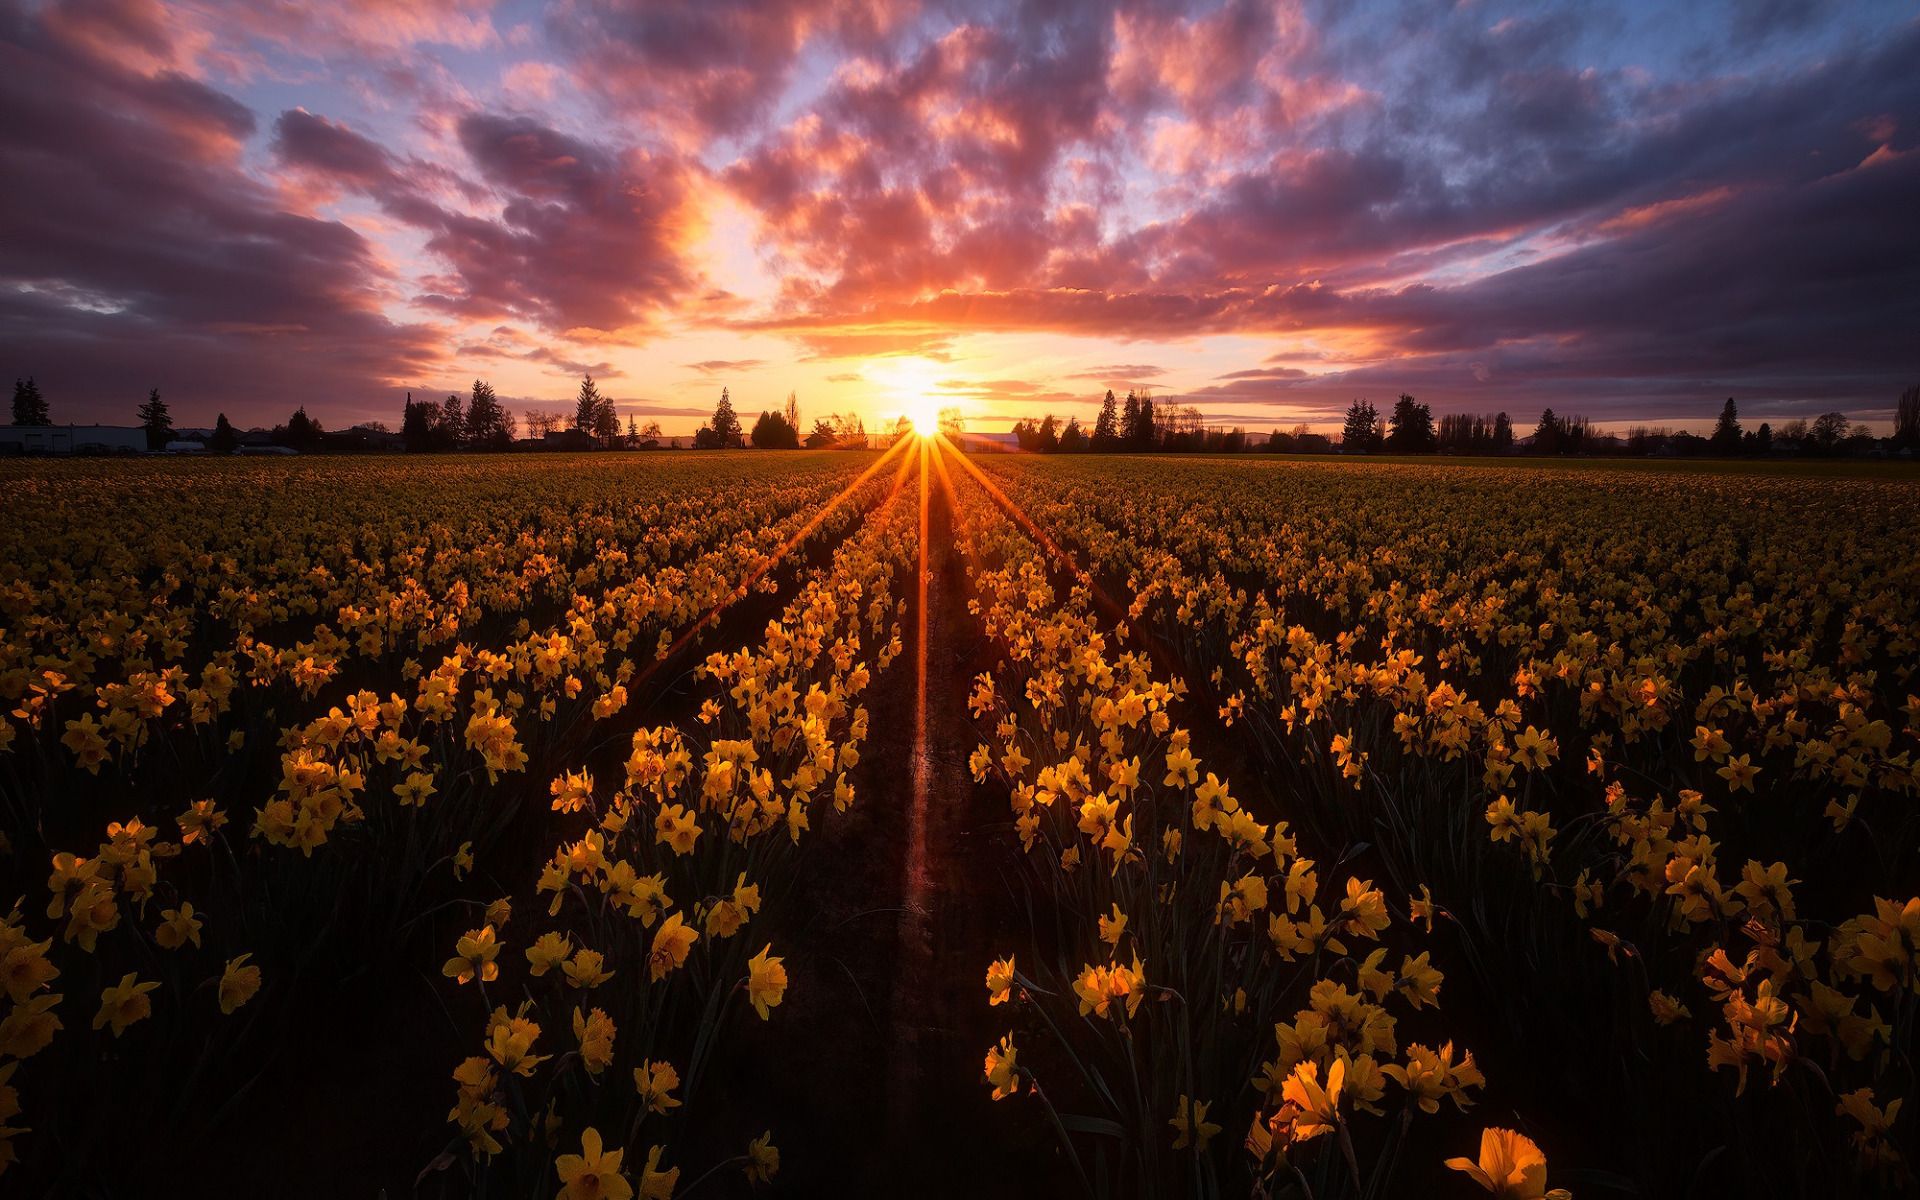 Download wallpaper Skagit Valley, field with daffodils